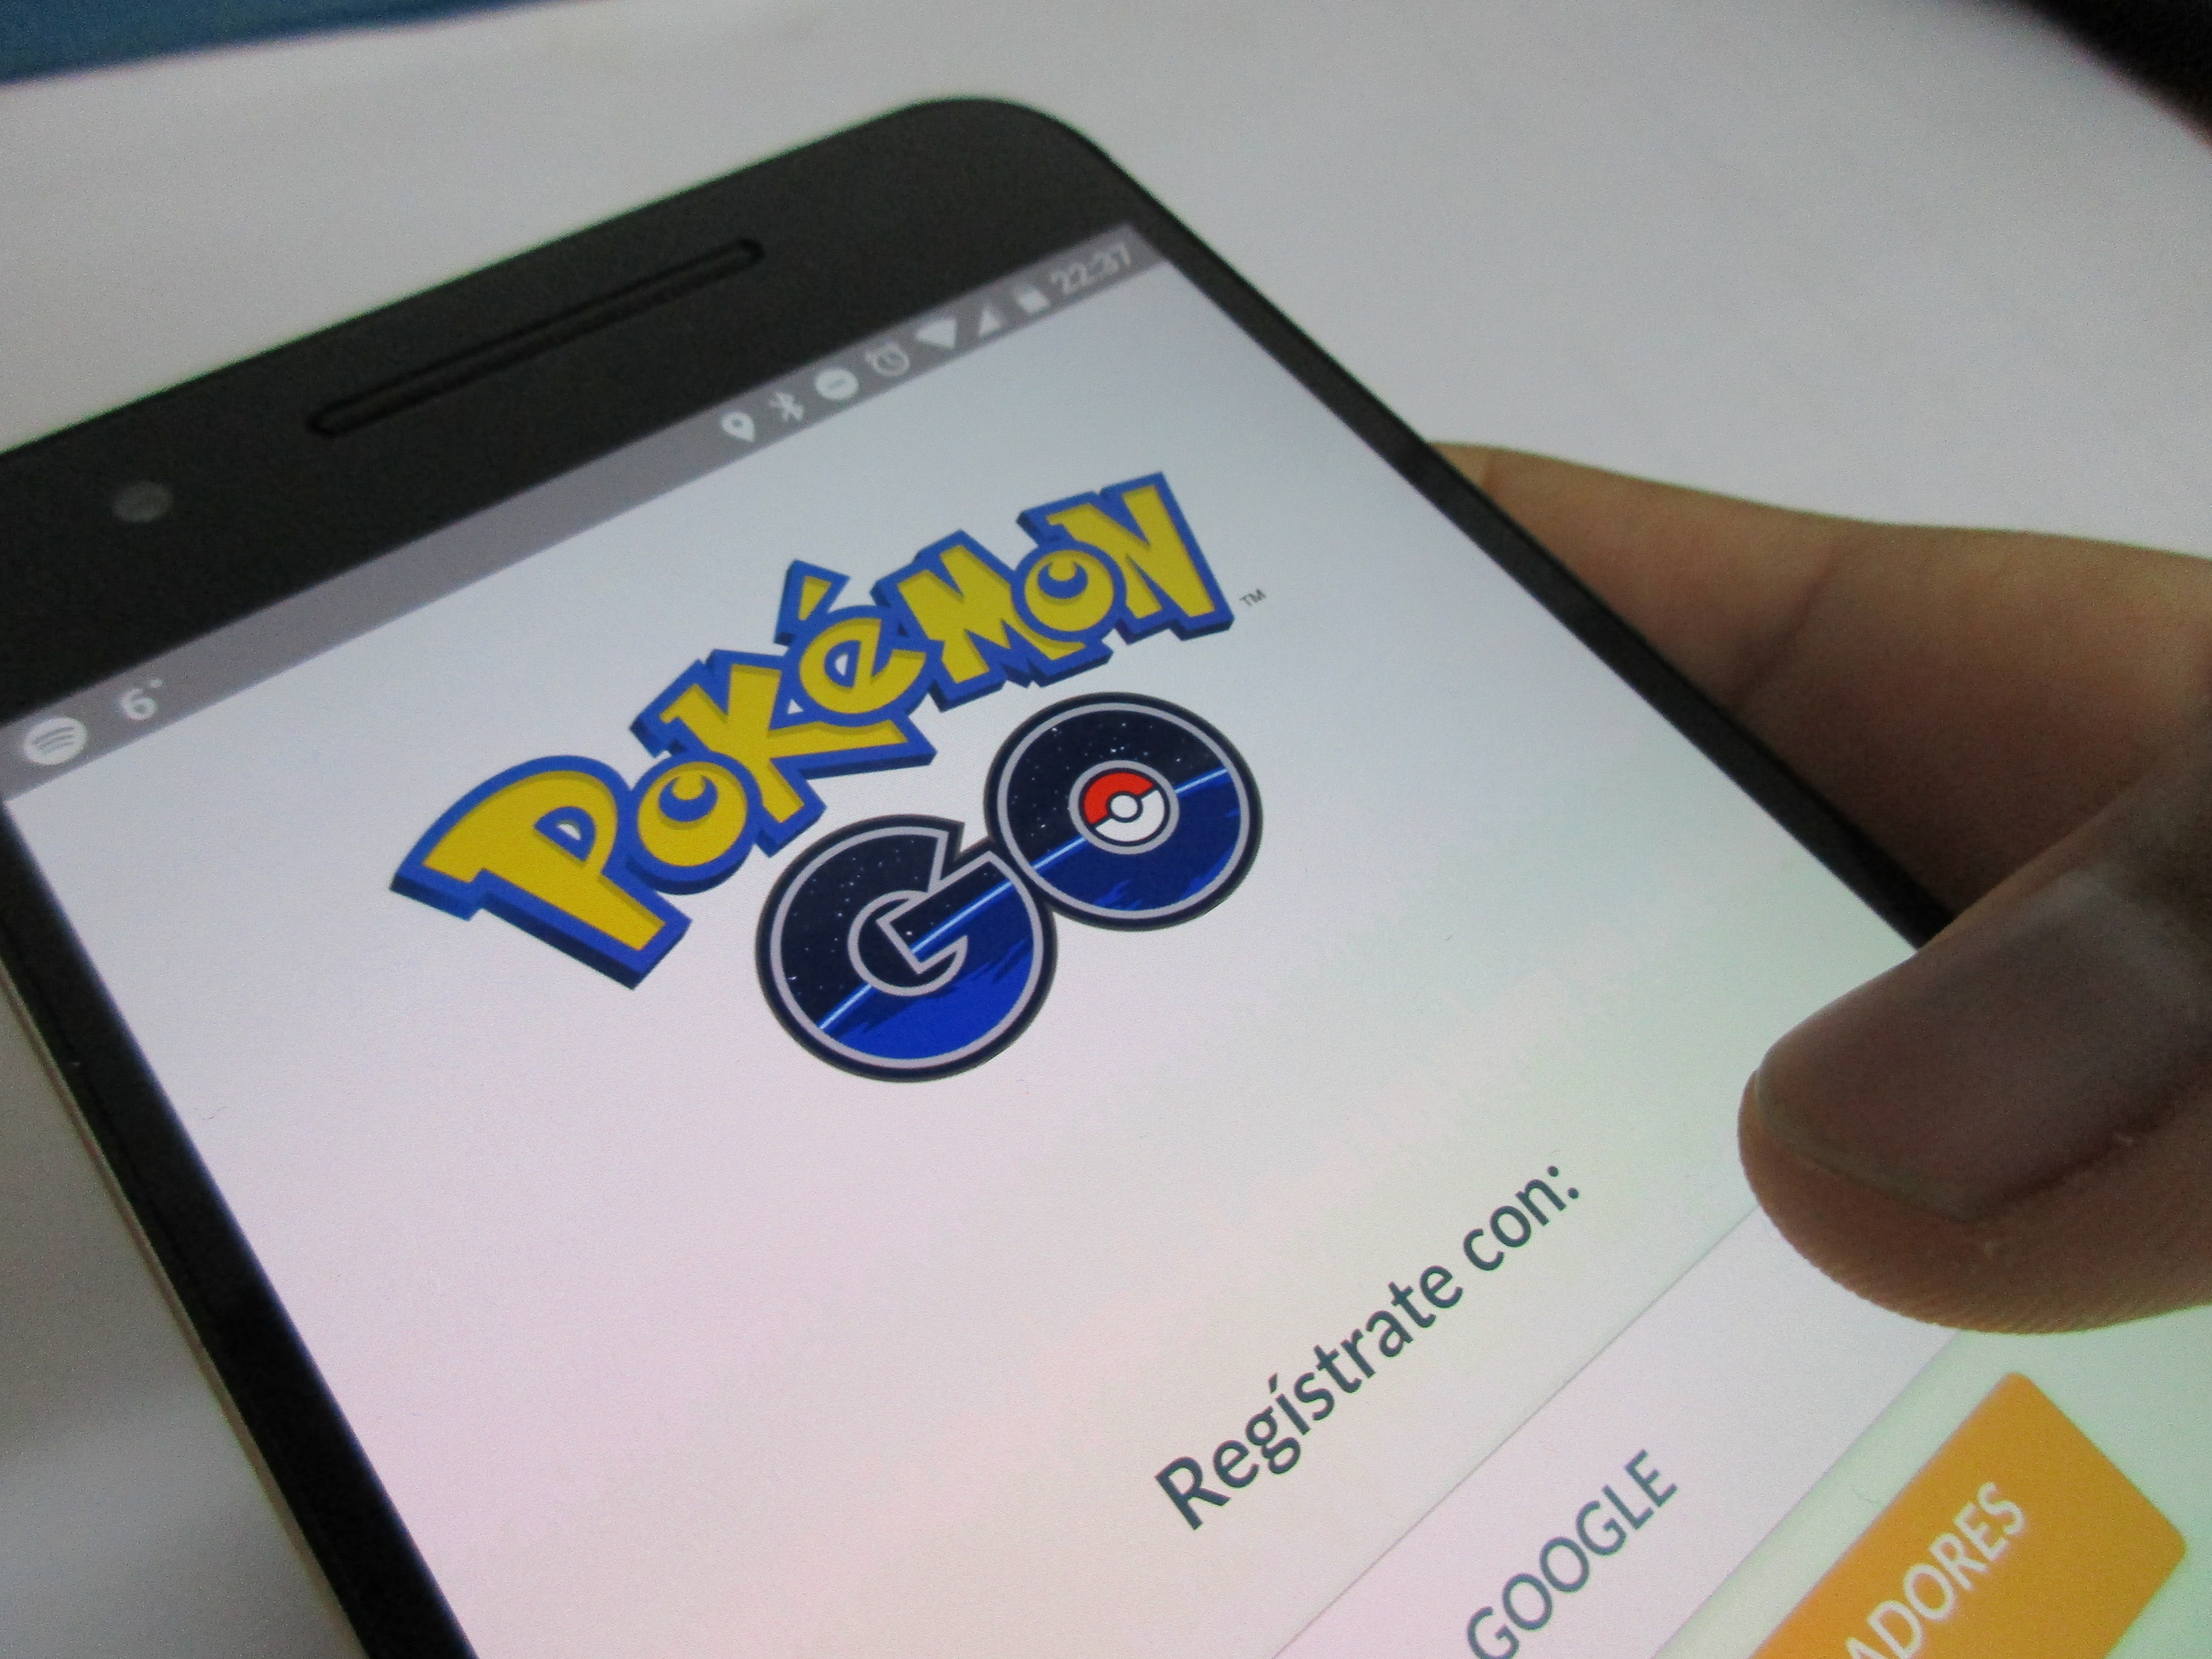 hacked pokemon go for android problems